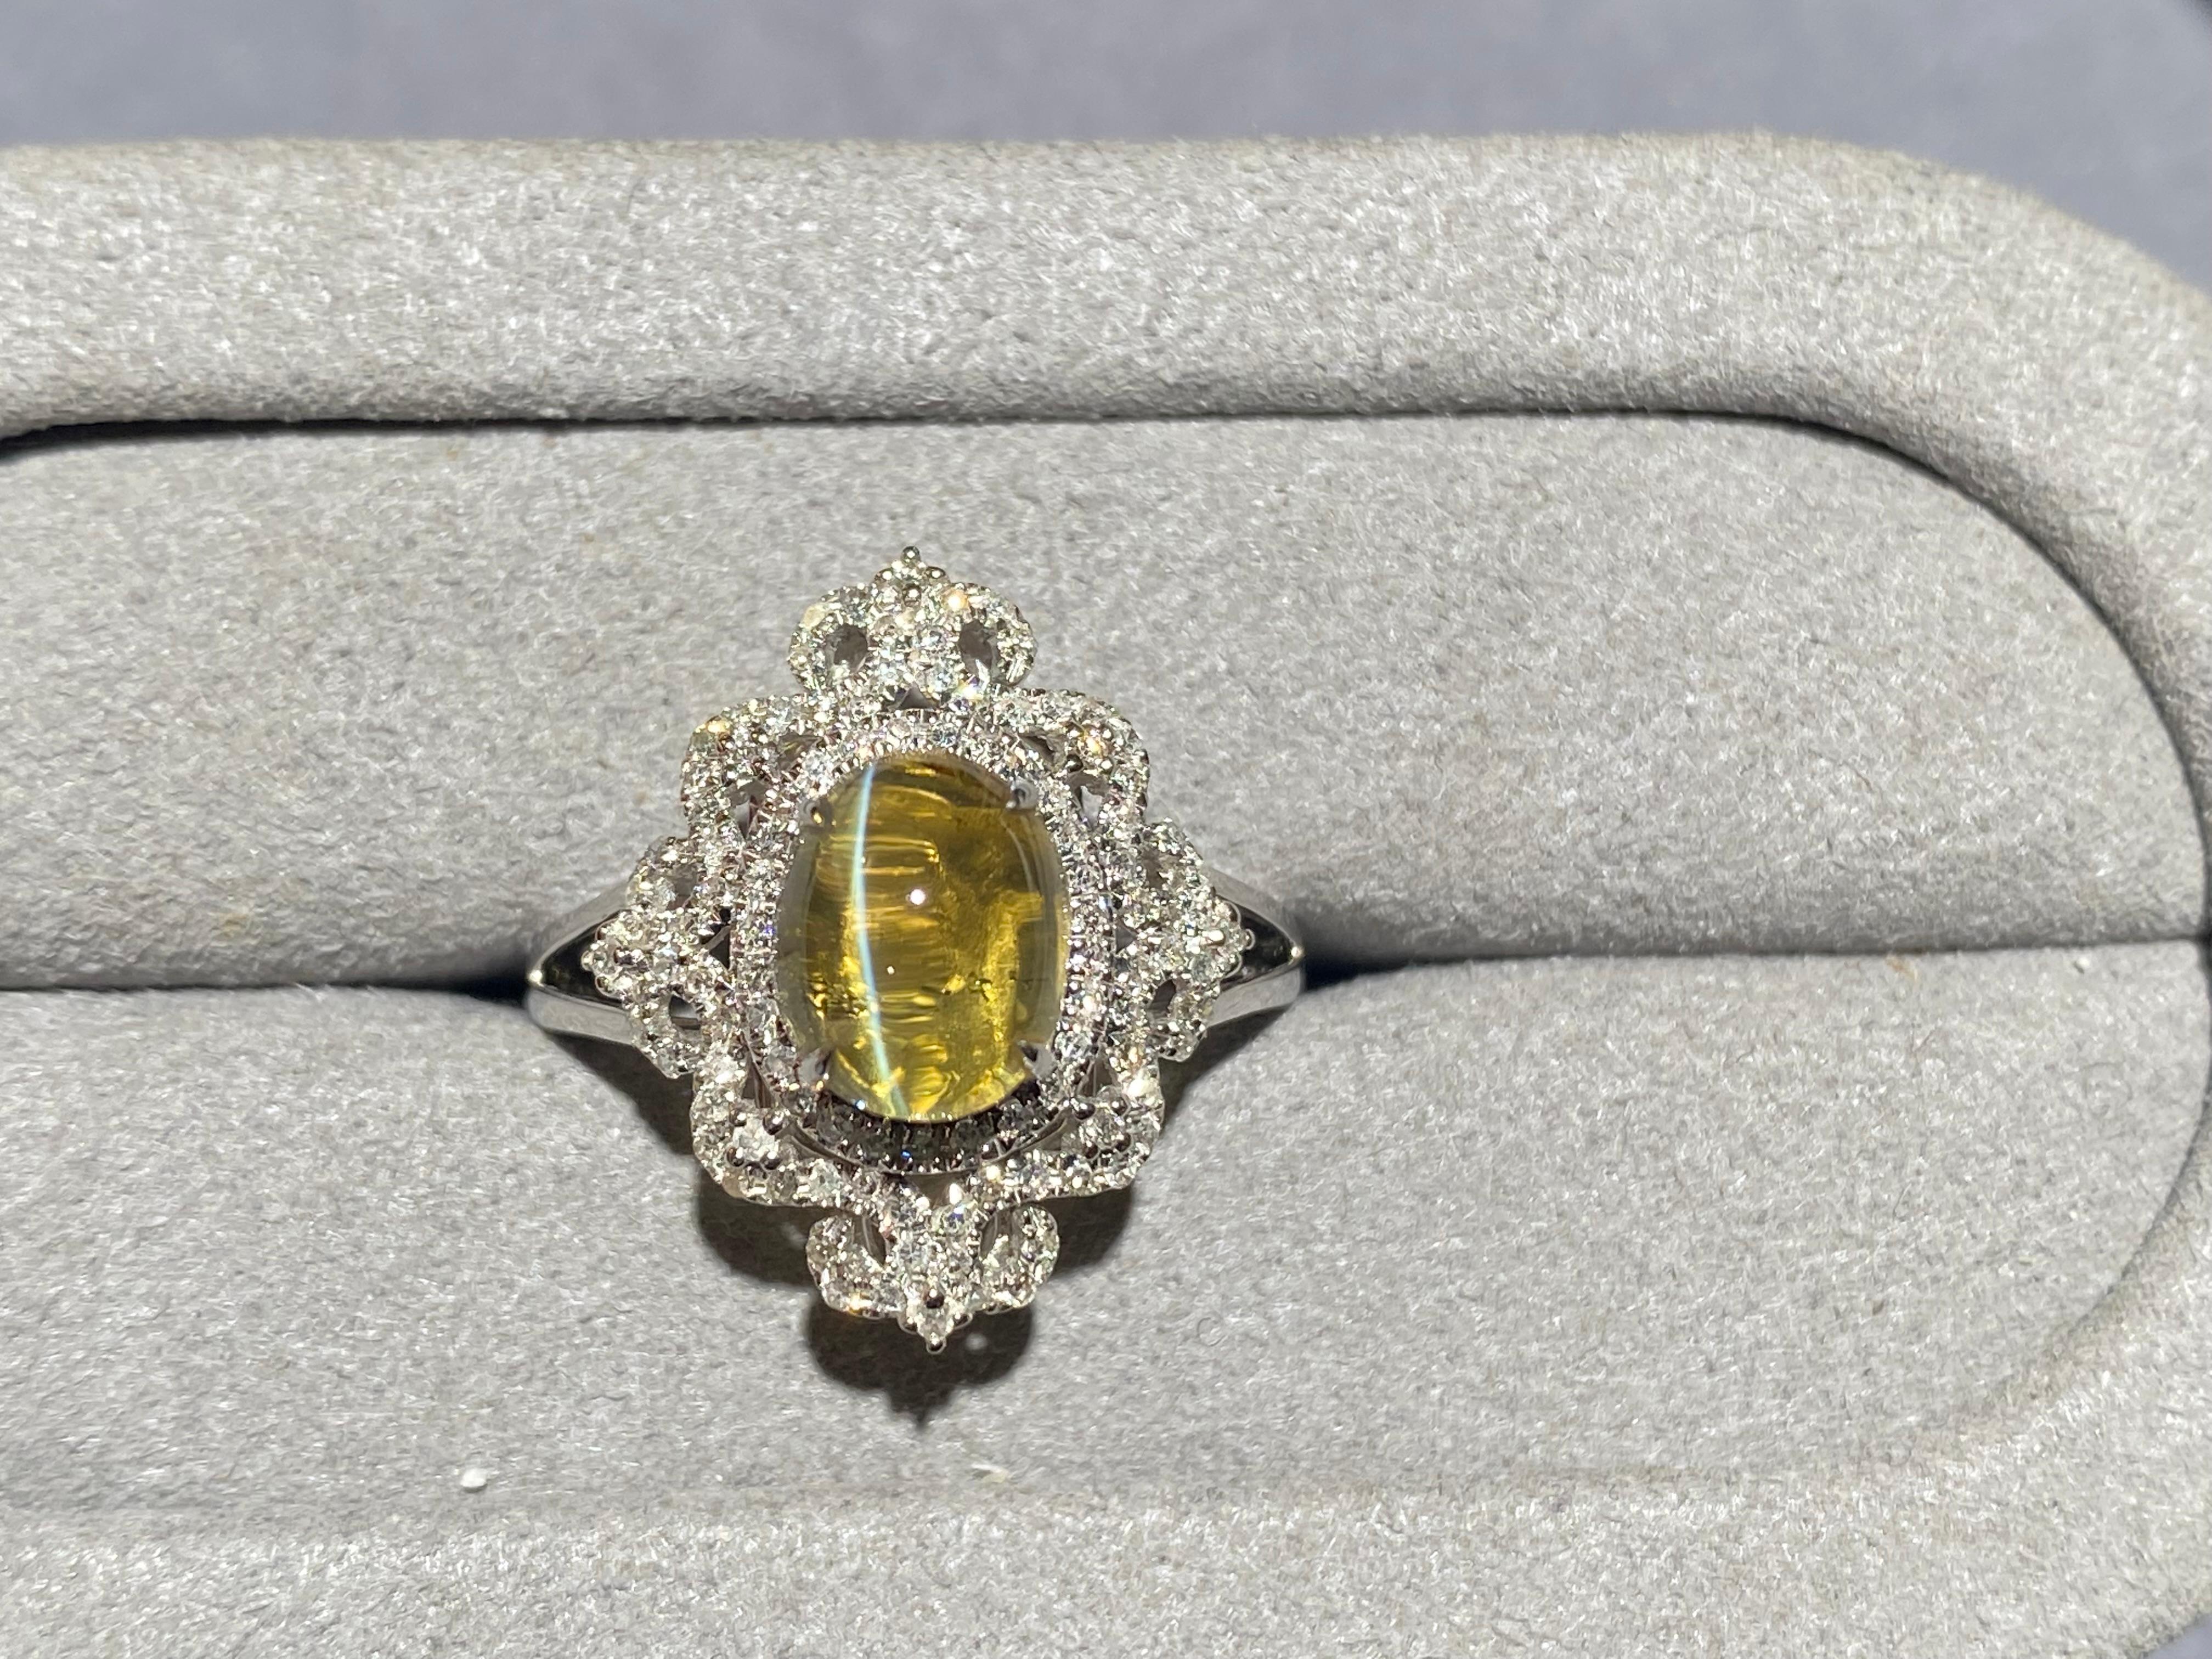 A Chrysoberyl cat's eye and diamond ring in 18k white gold. This is a classical design with the main stone surrounded by repetitive pattern set with diamond pave. 

US Ring size 7.5
Total diamond weight is 0.618 ct 